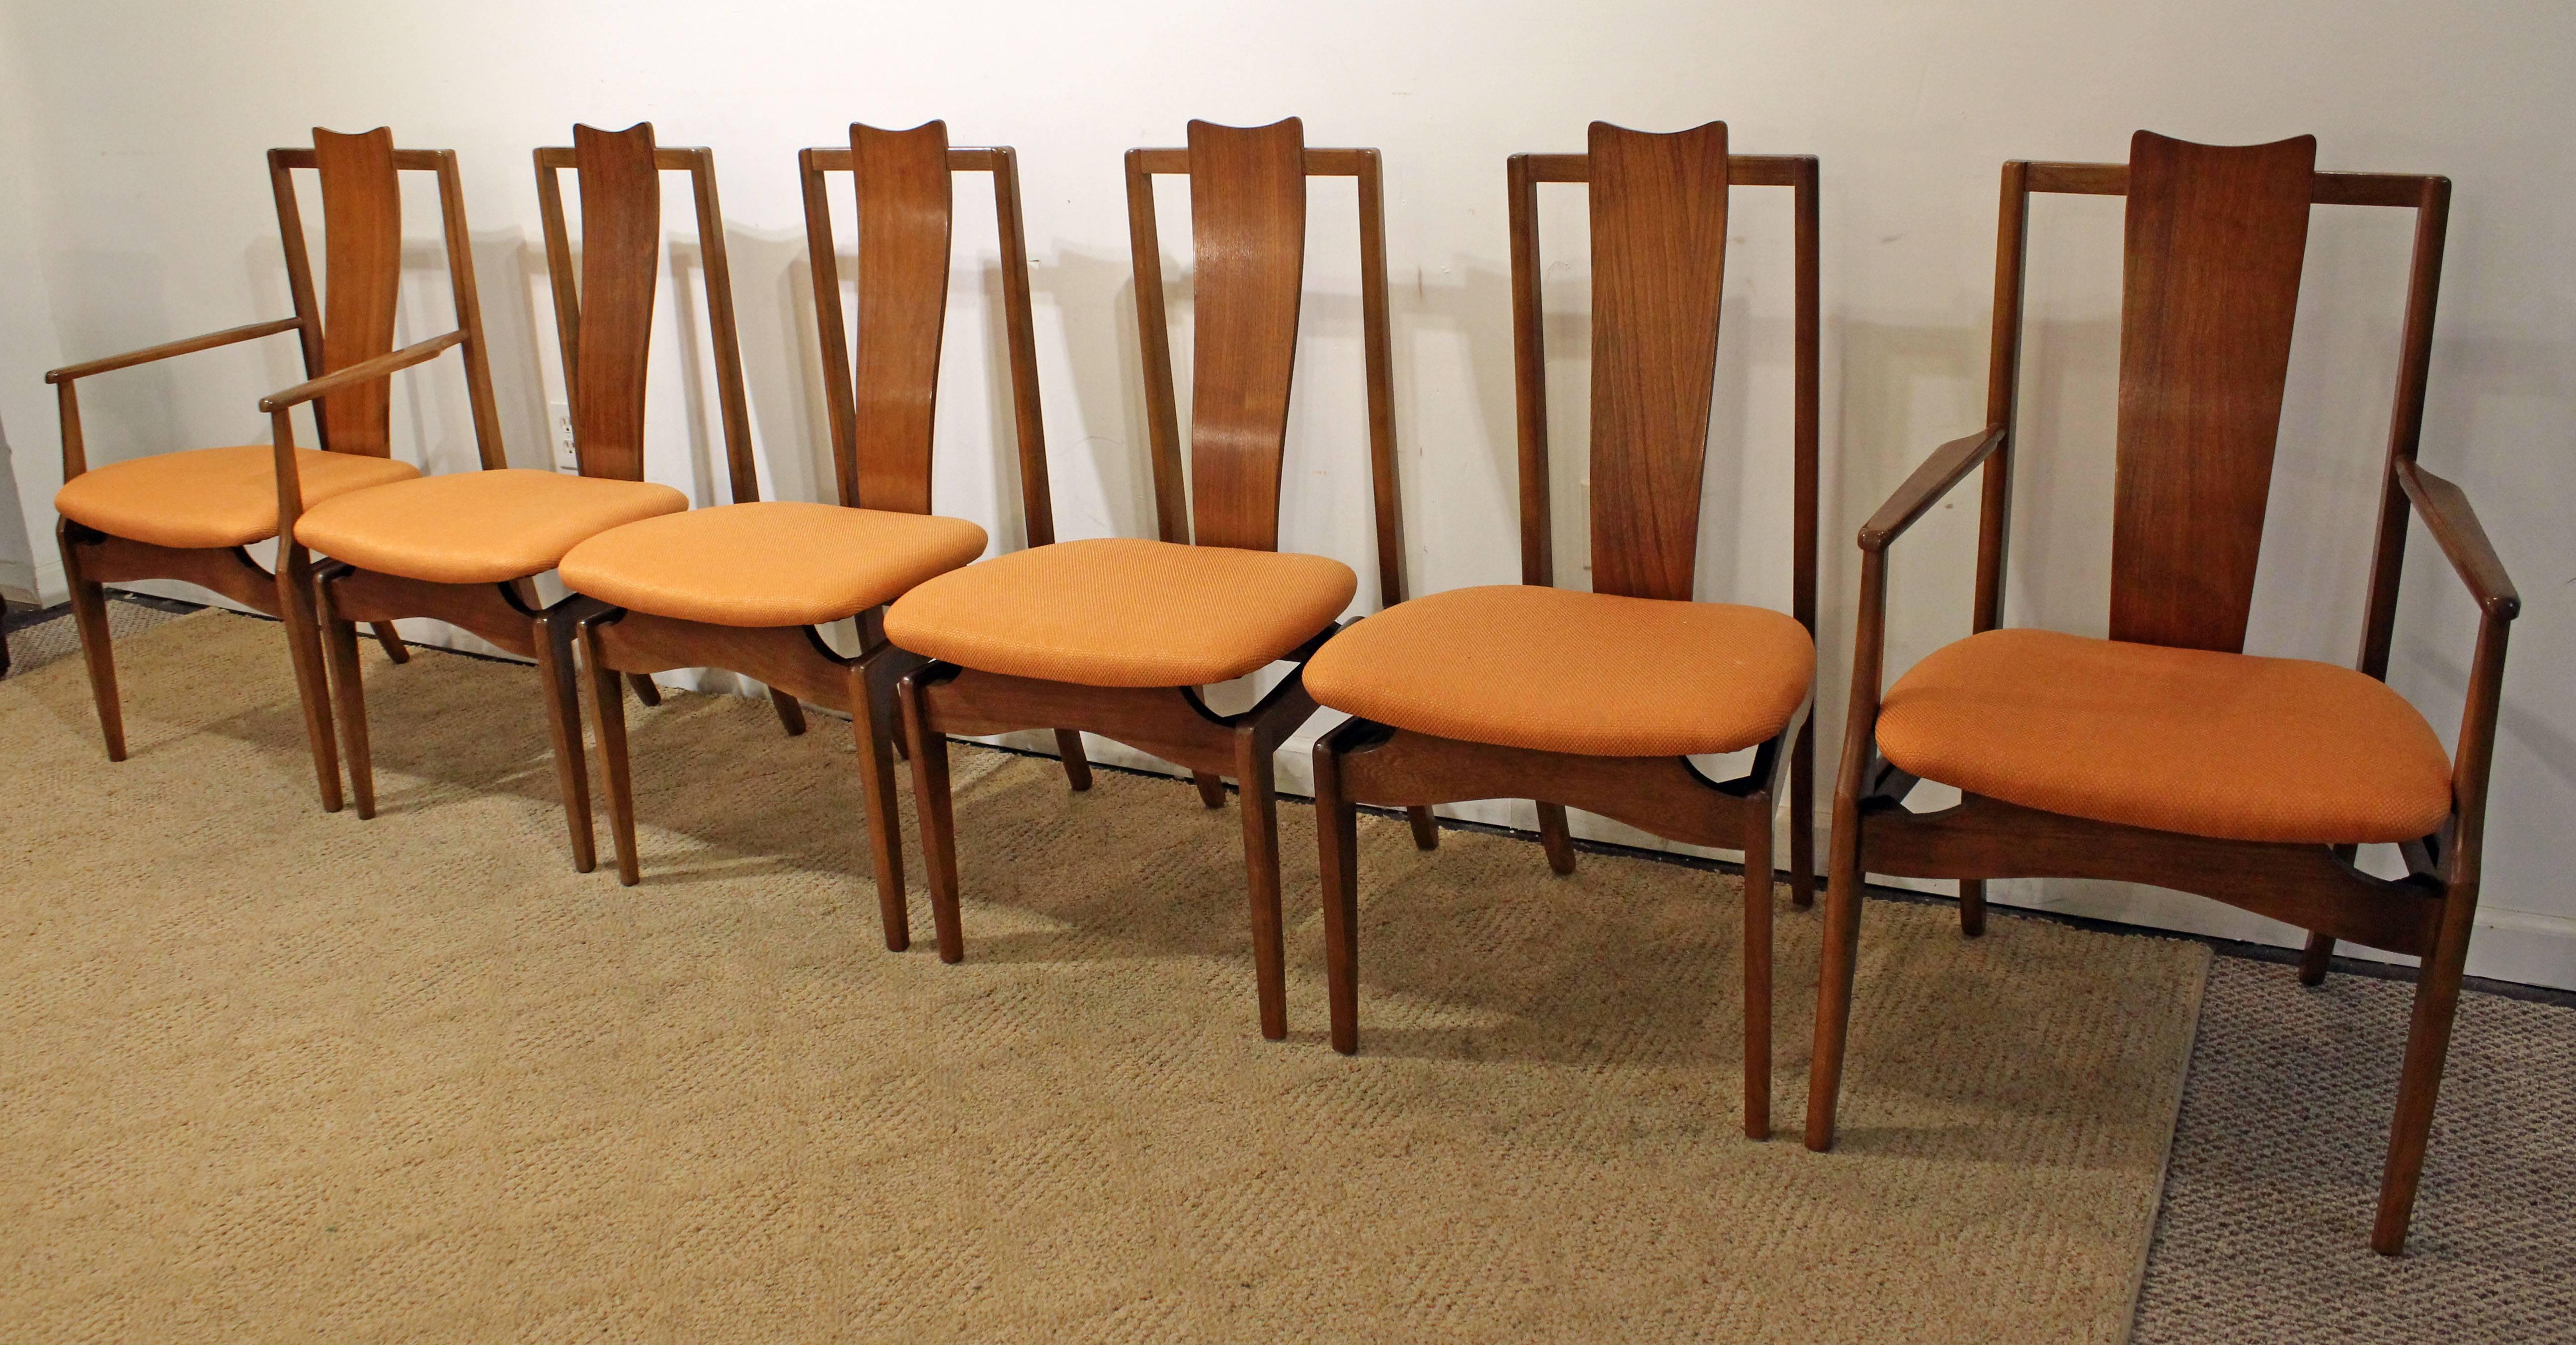 Offered is a set of six walnut dining chairs by Young Mfg Co. Includes two arm chairs and four side chairs. Features sculpted backs and floating seats that have been reupholstered. In very good condition with minor age wear (see pics).

Measures: